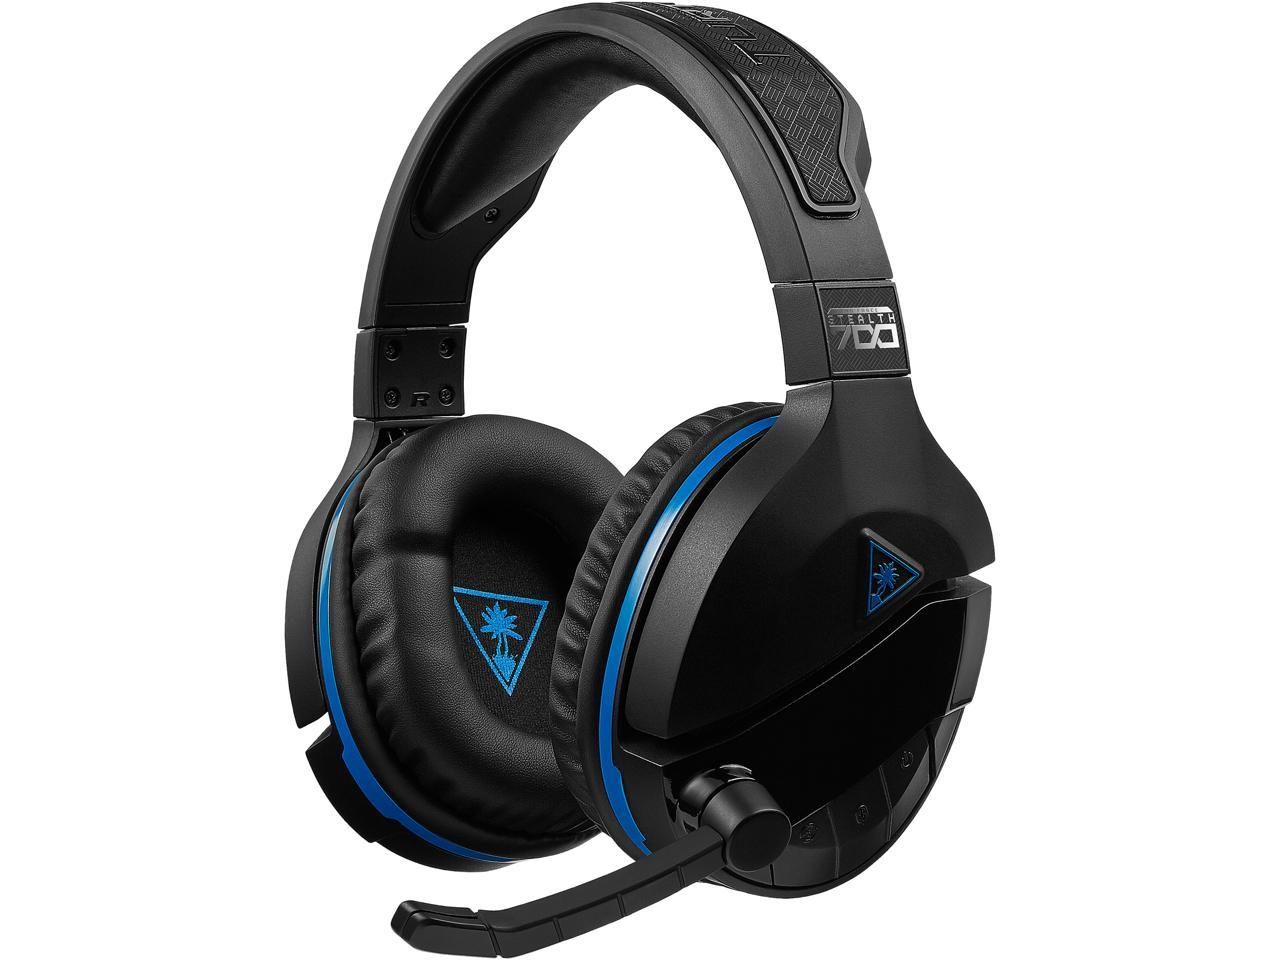 turtle beach audio hub not detecting stealth 700 on pc